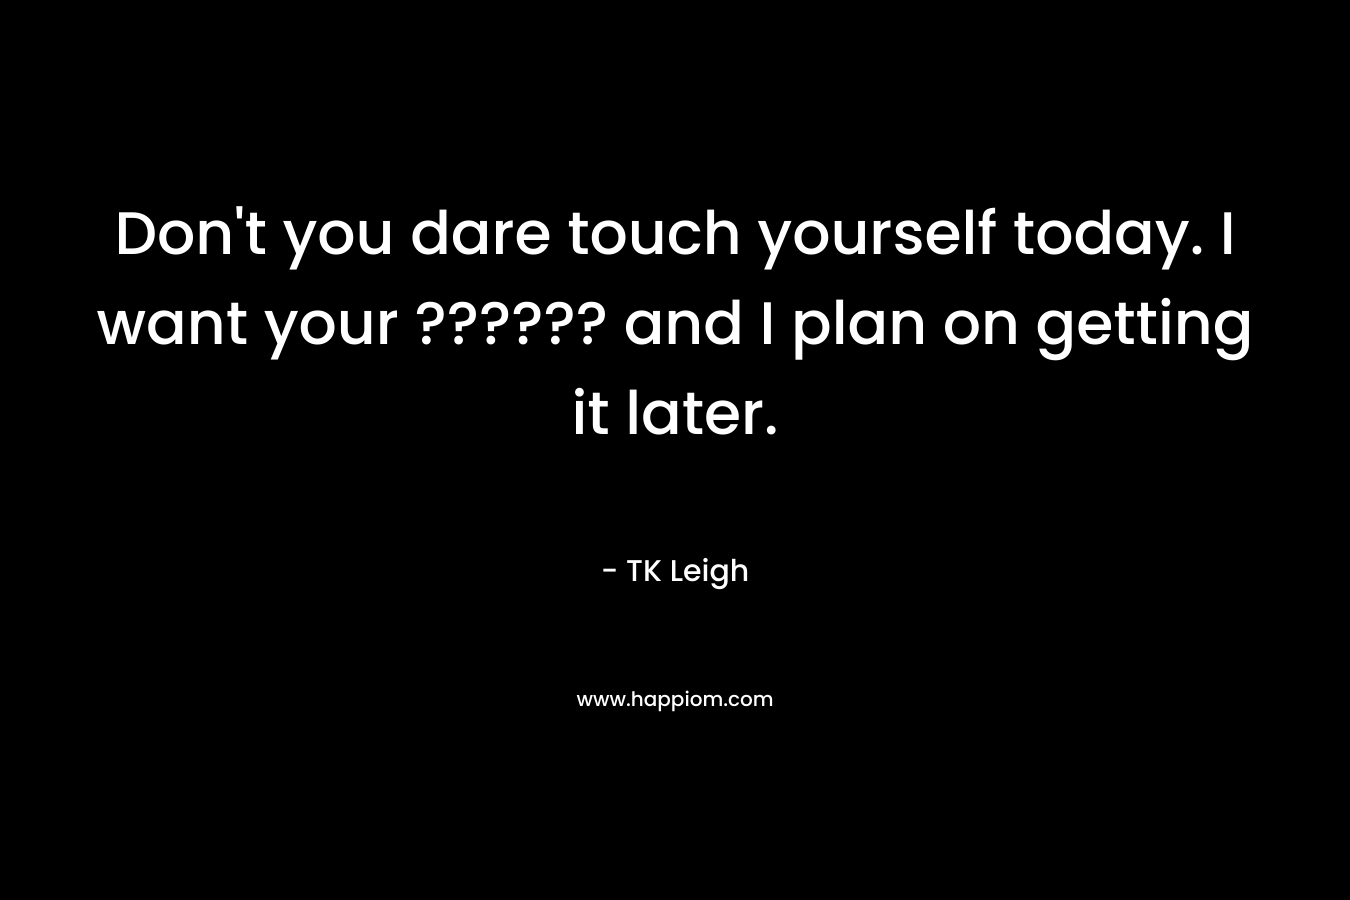 Don't you dare touch yourself today. I want your ?????? and I plan on getting it later.